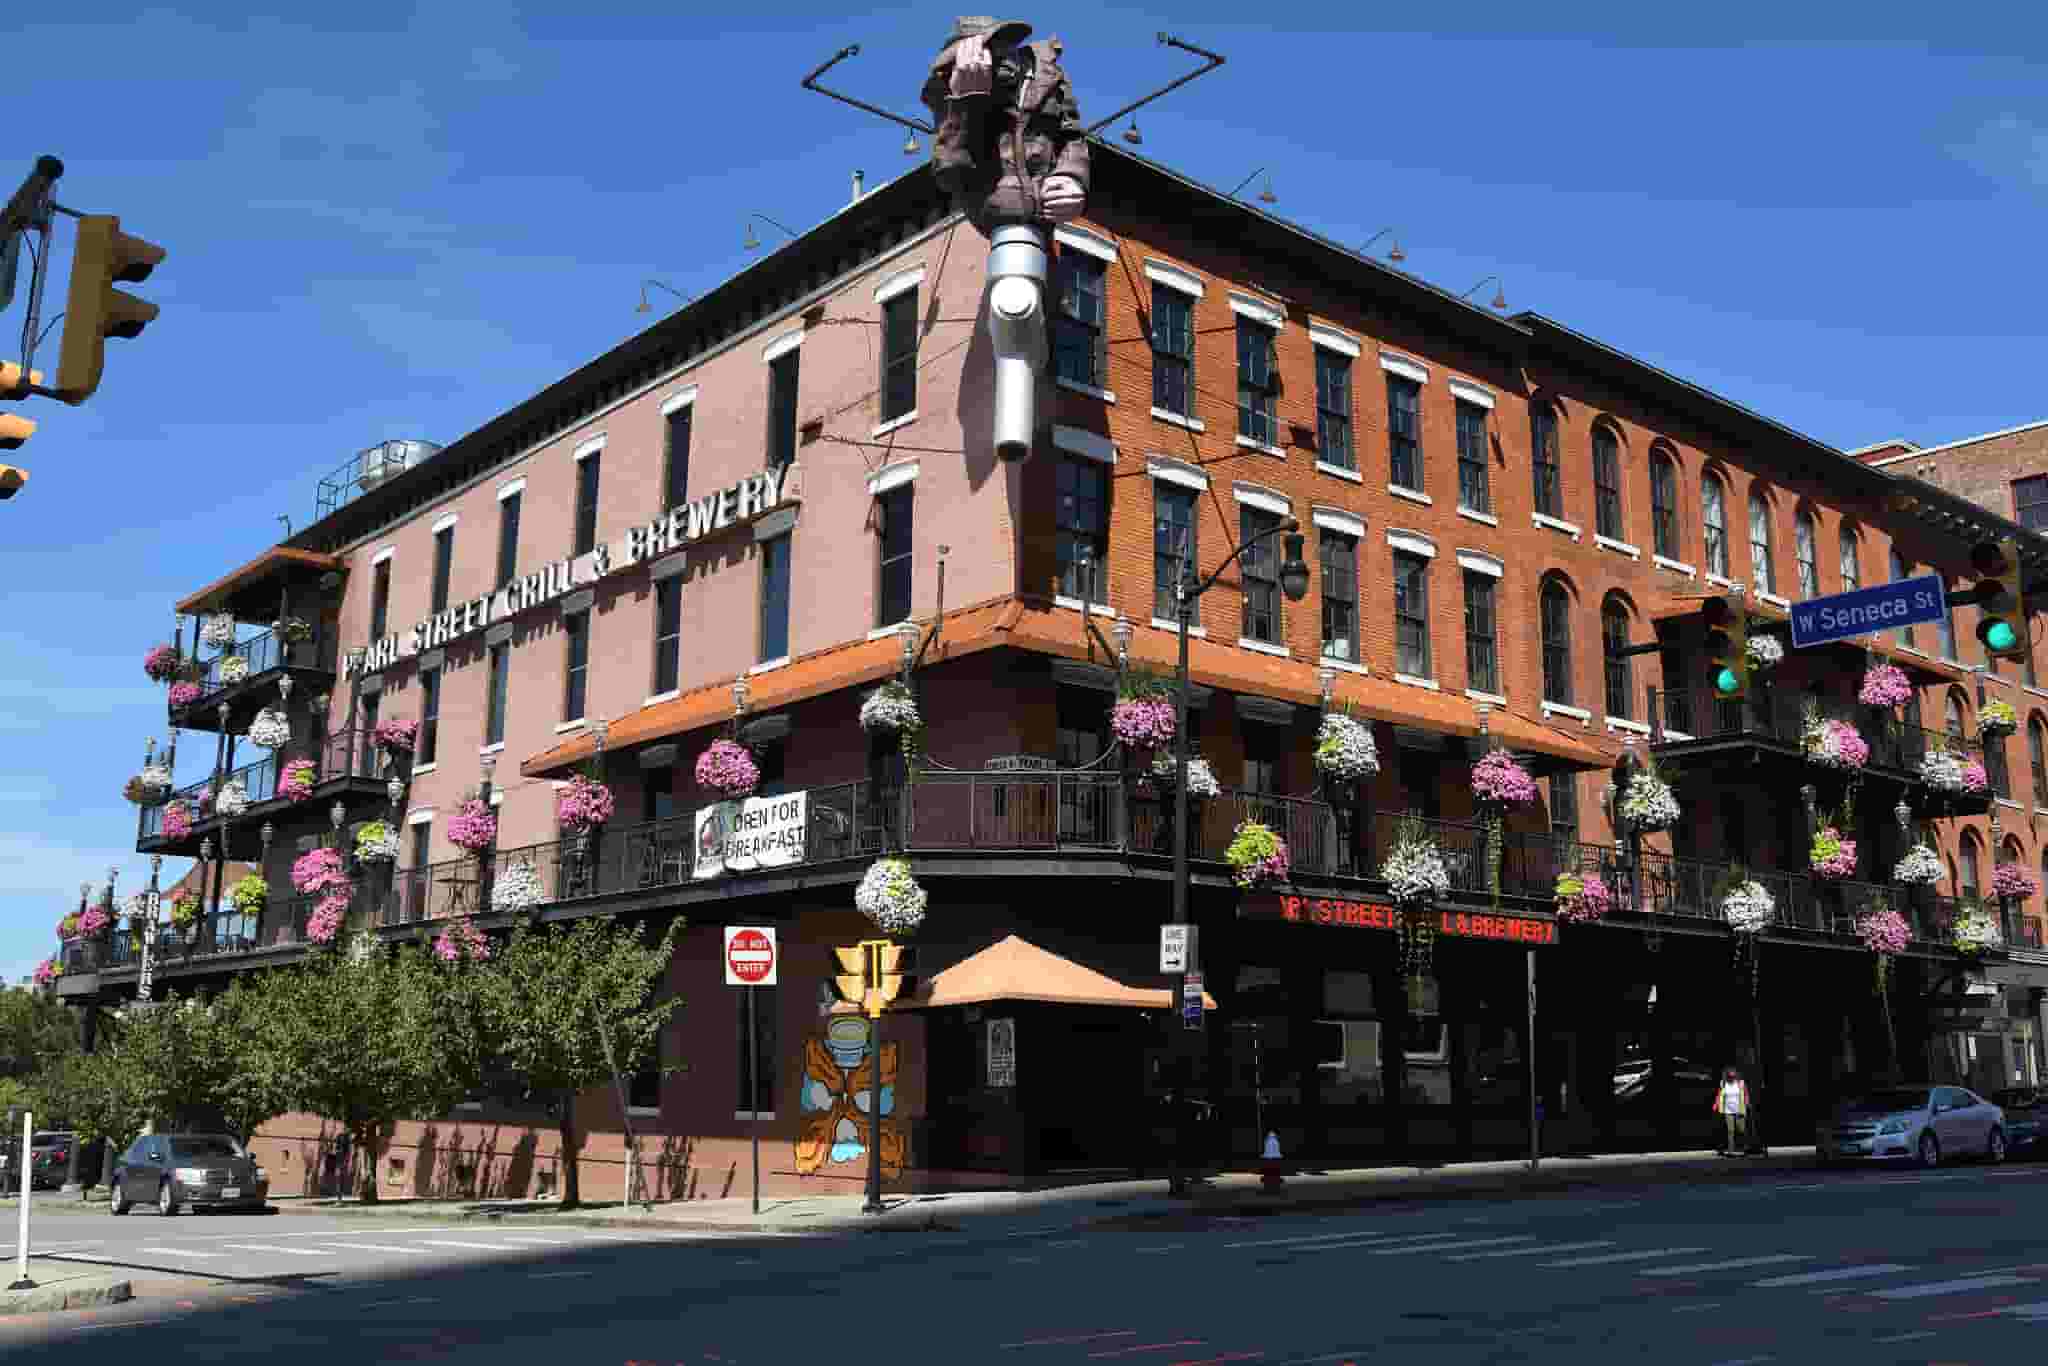 Pearl Street Grill & Brewery